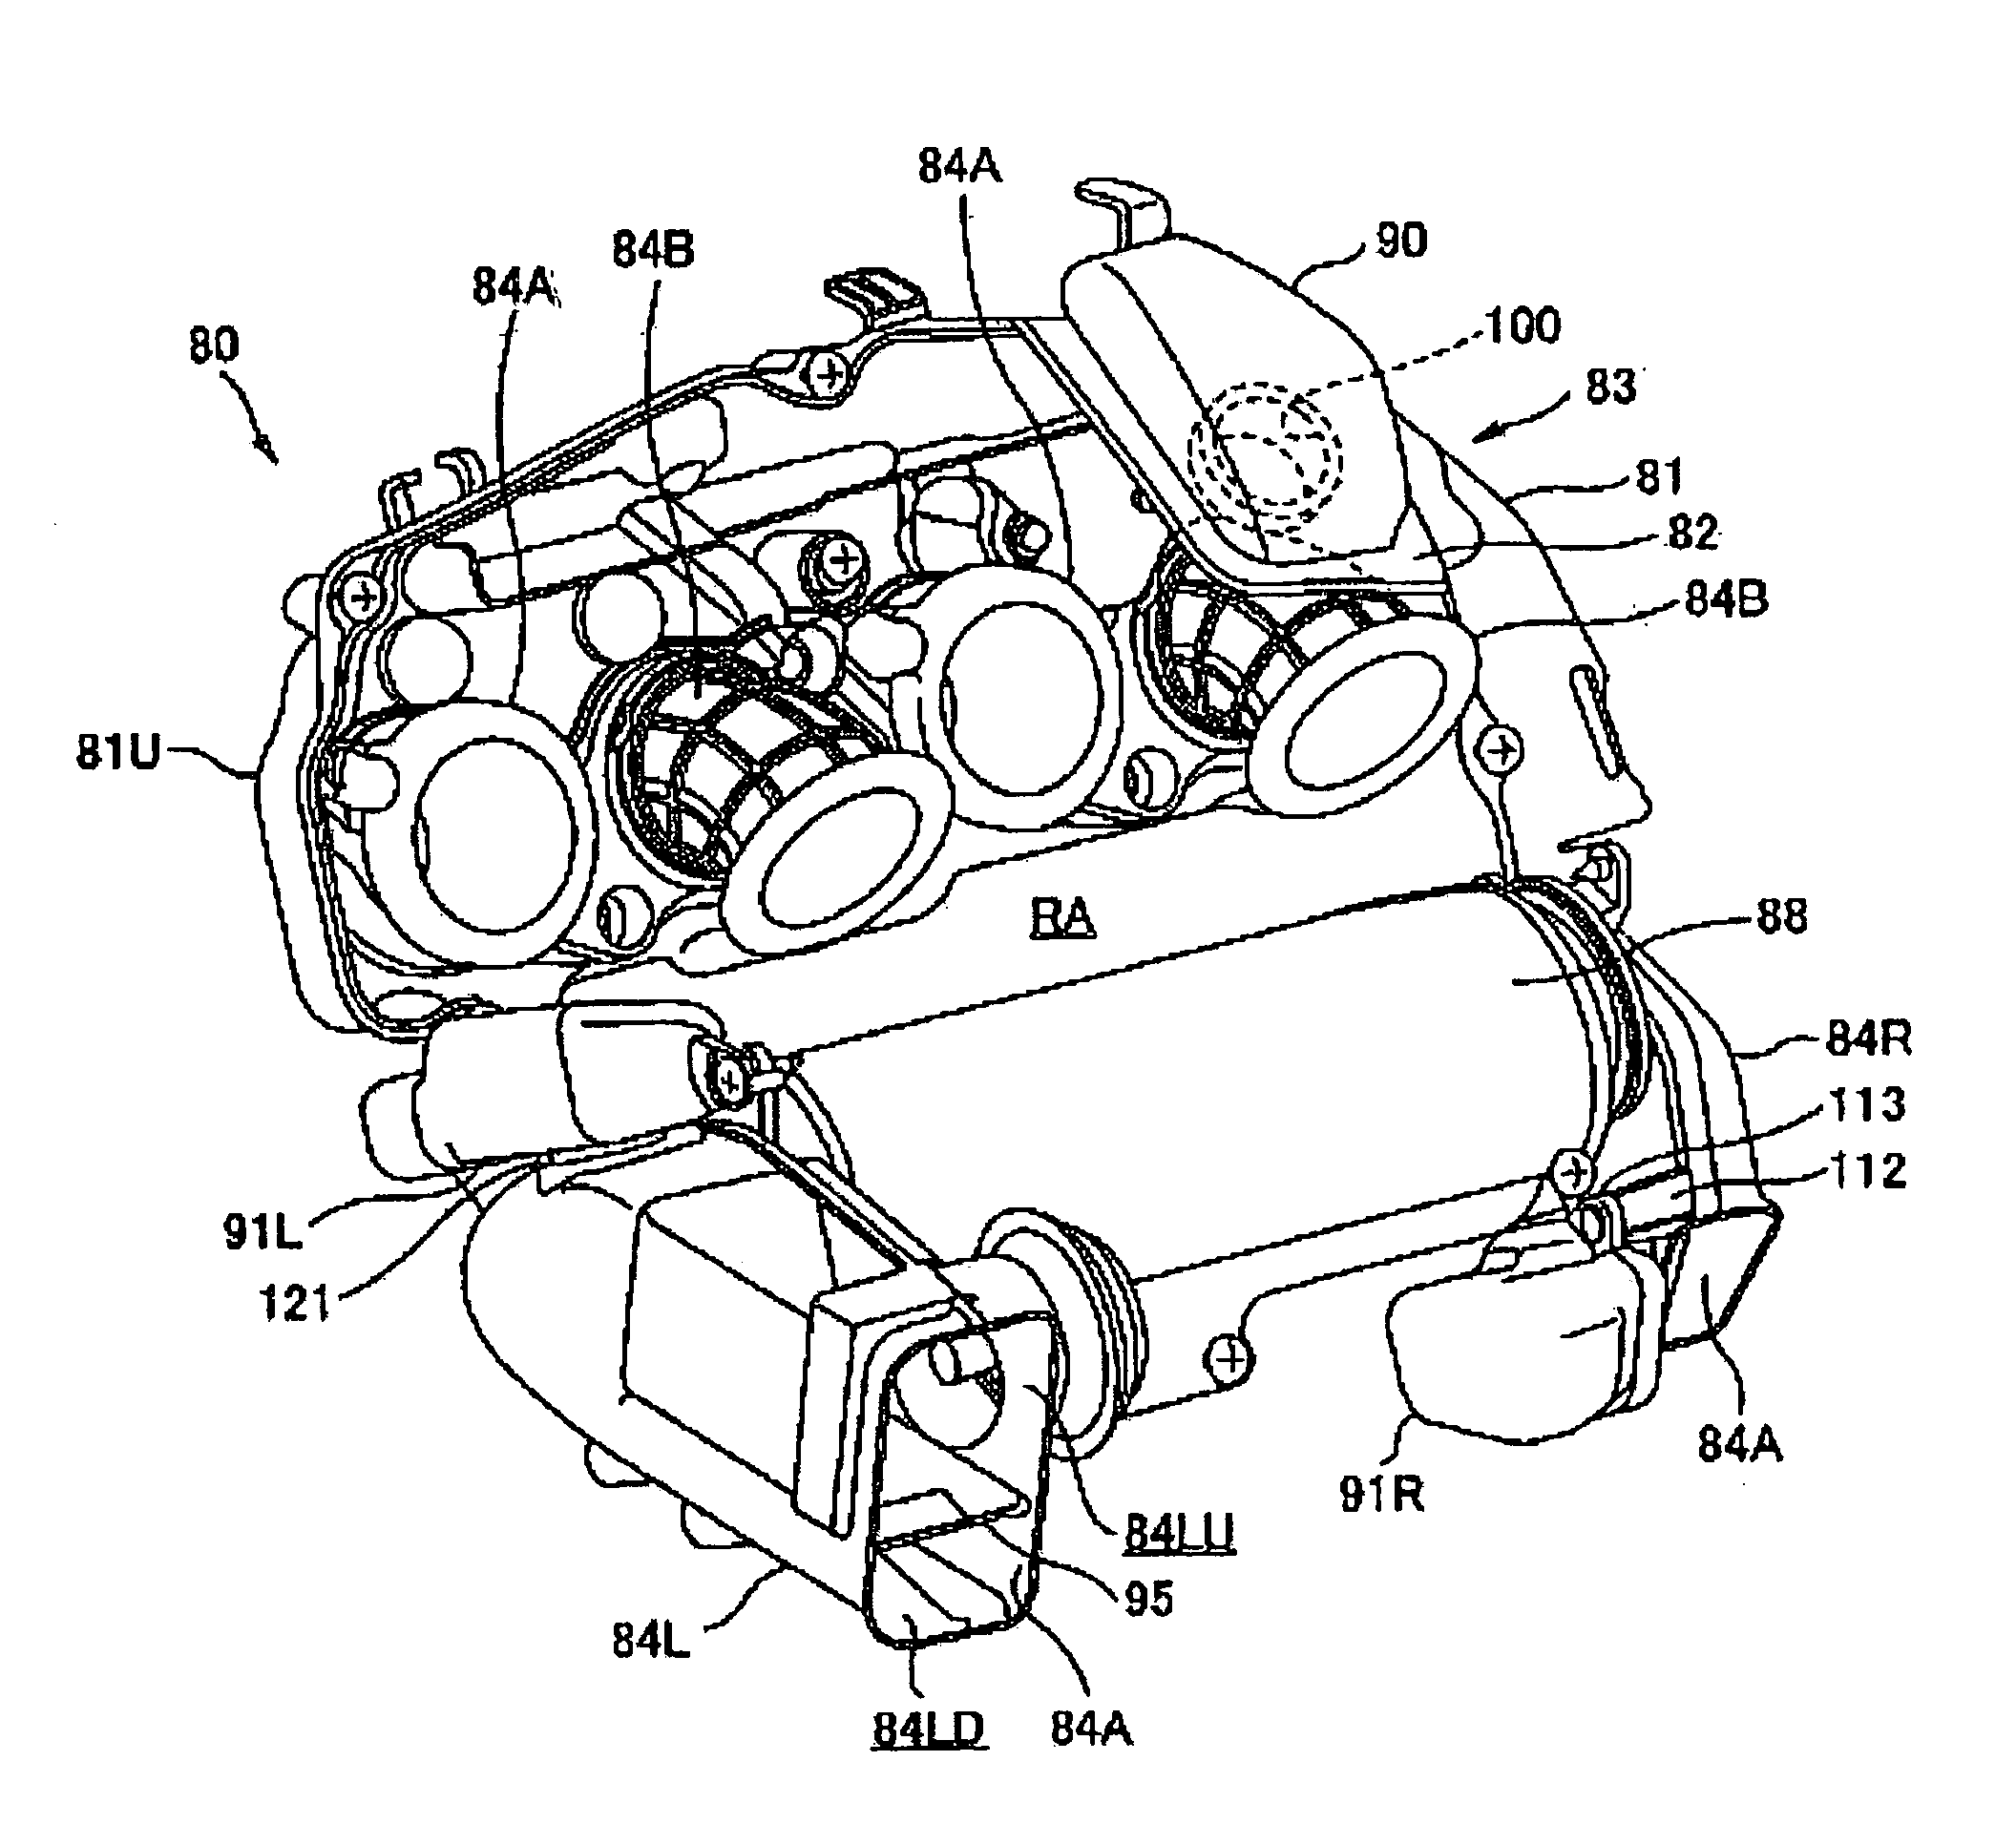 Intake device of motorcycle